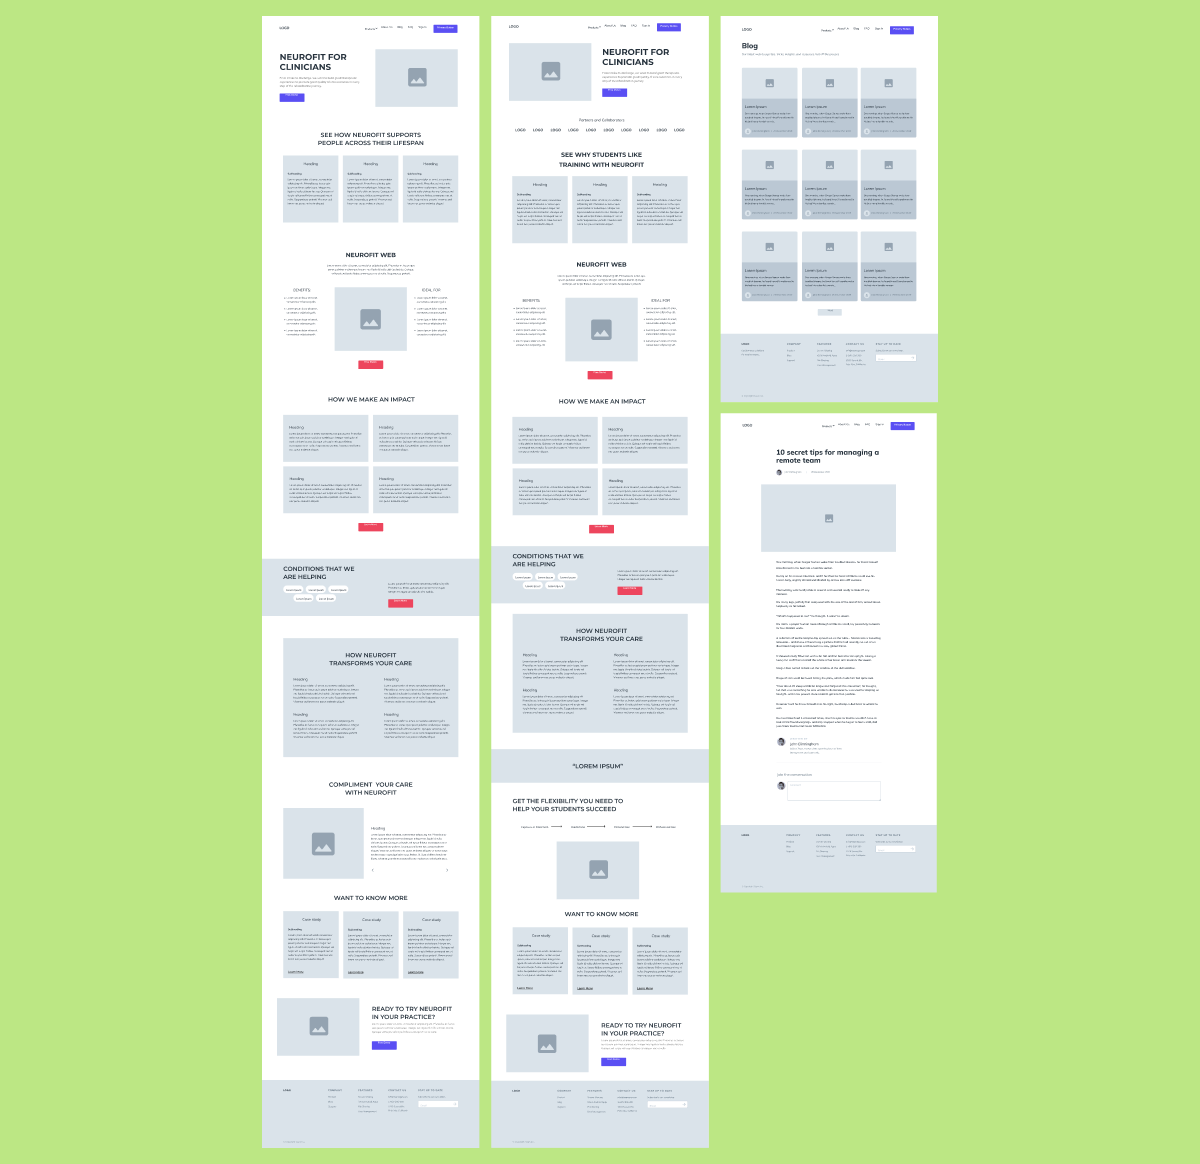 Low-fi wireframing and prototyping